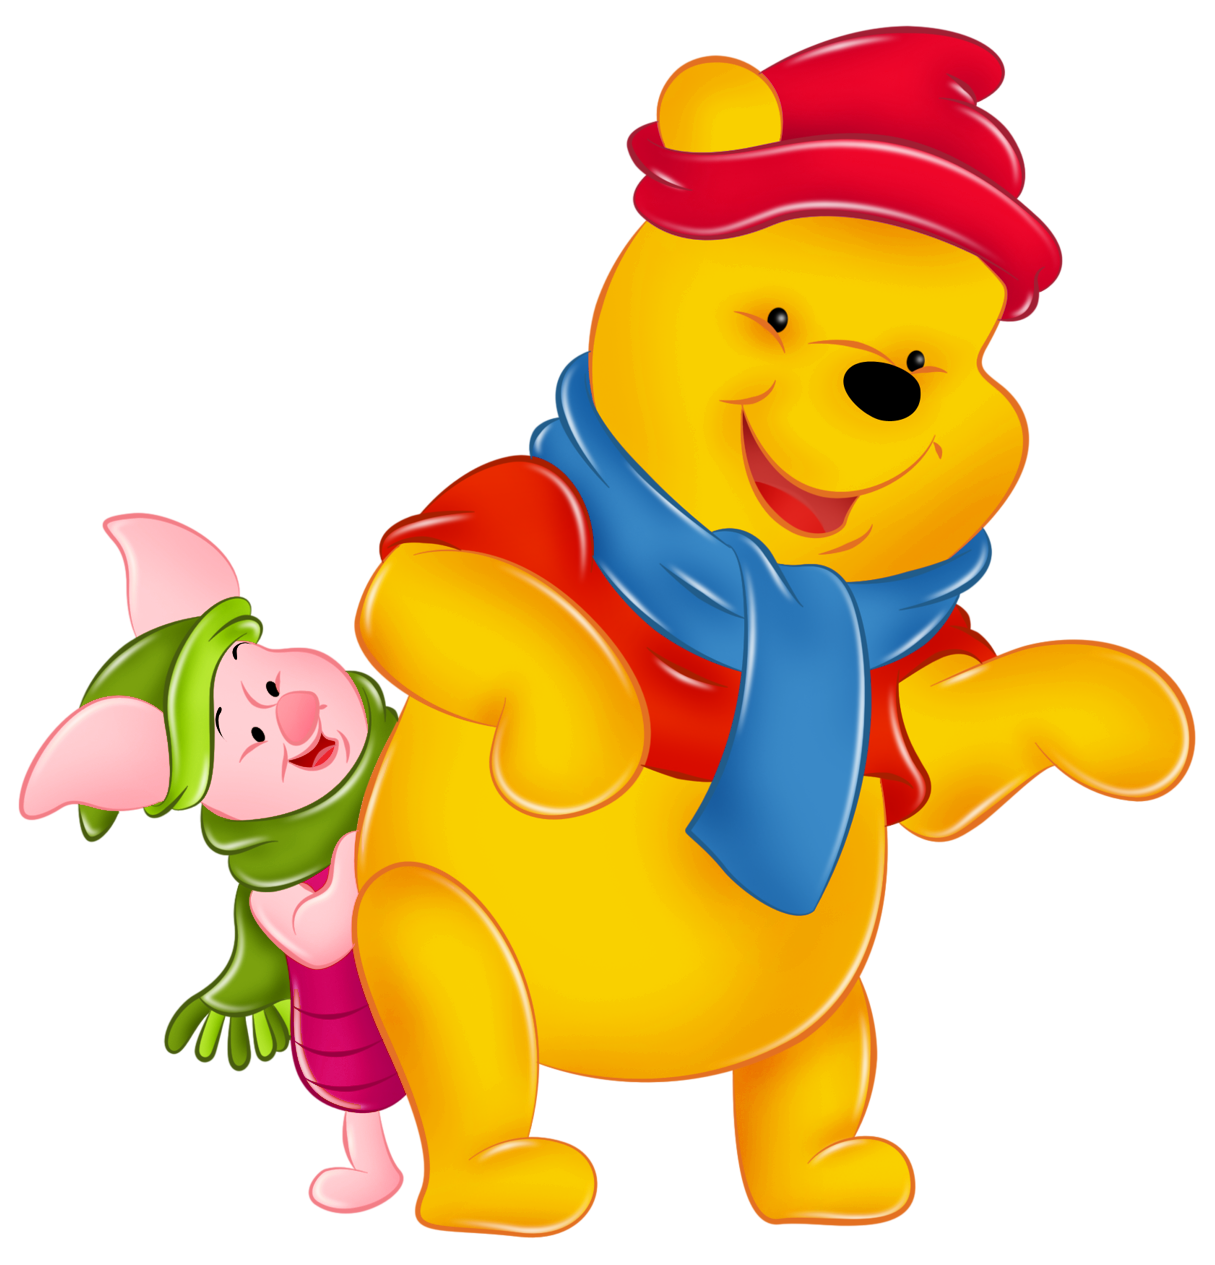 Winnie Pooh And Piglet PNG Image